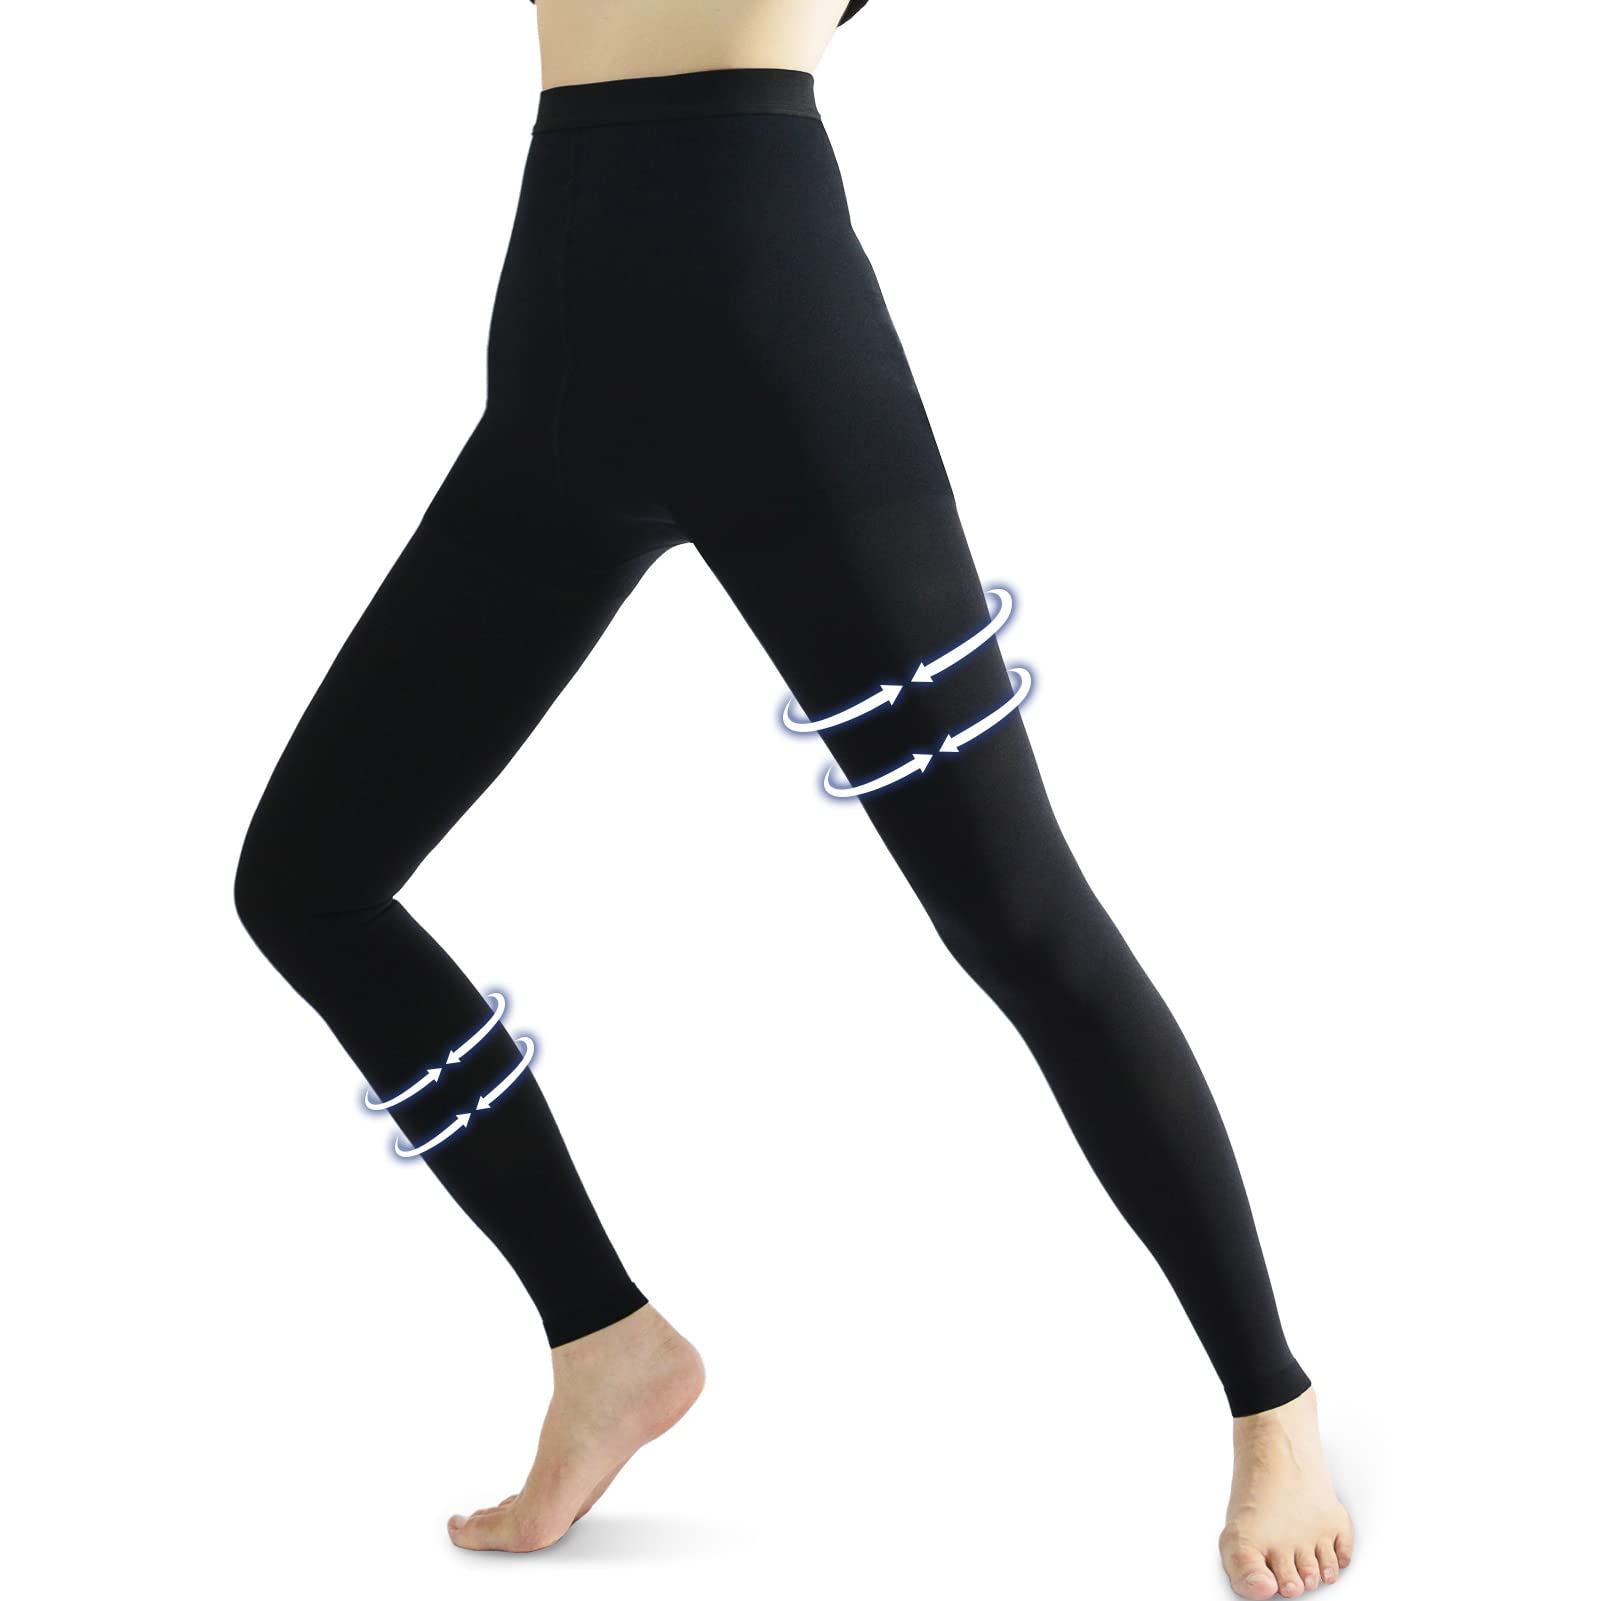 How do medical compression leggings work for men with swollen legs